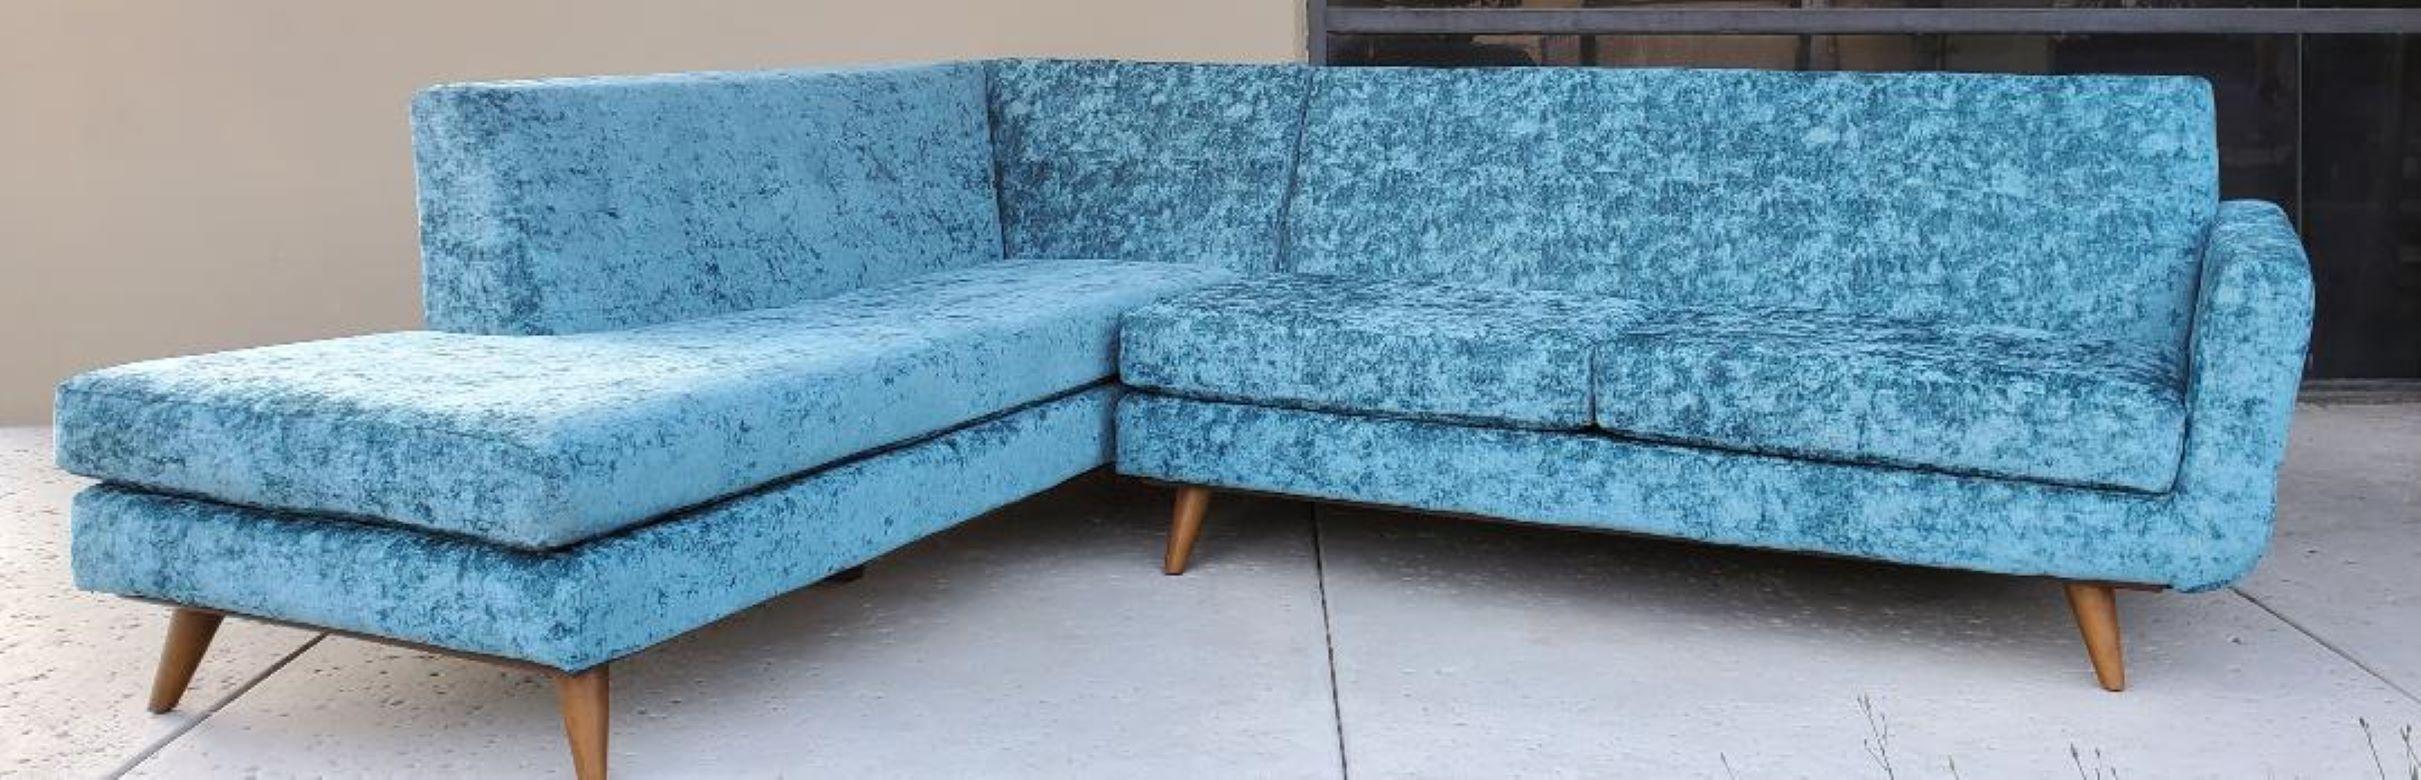 60s Low Slung Style Sectional Tapered Legs Aqua Green Crushed Velvet Upholstery In Good Condition For Sale In Monrovia, CA